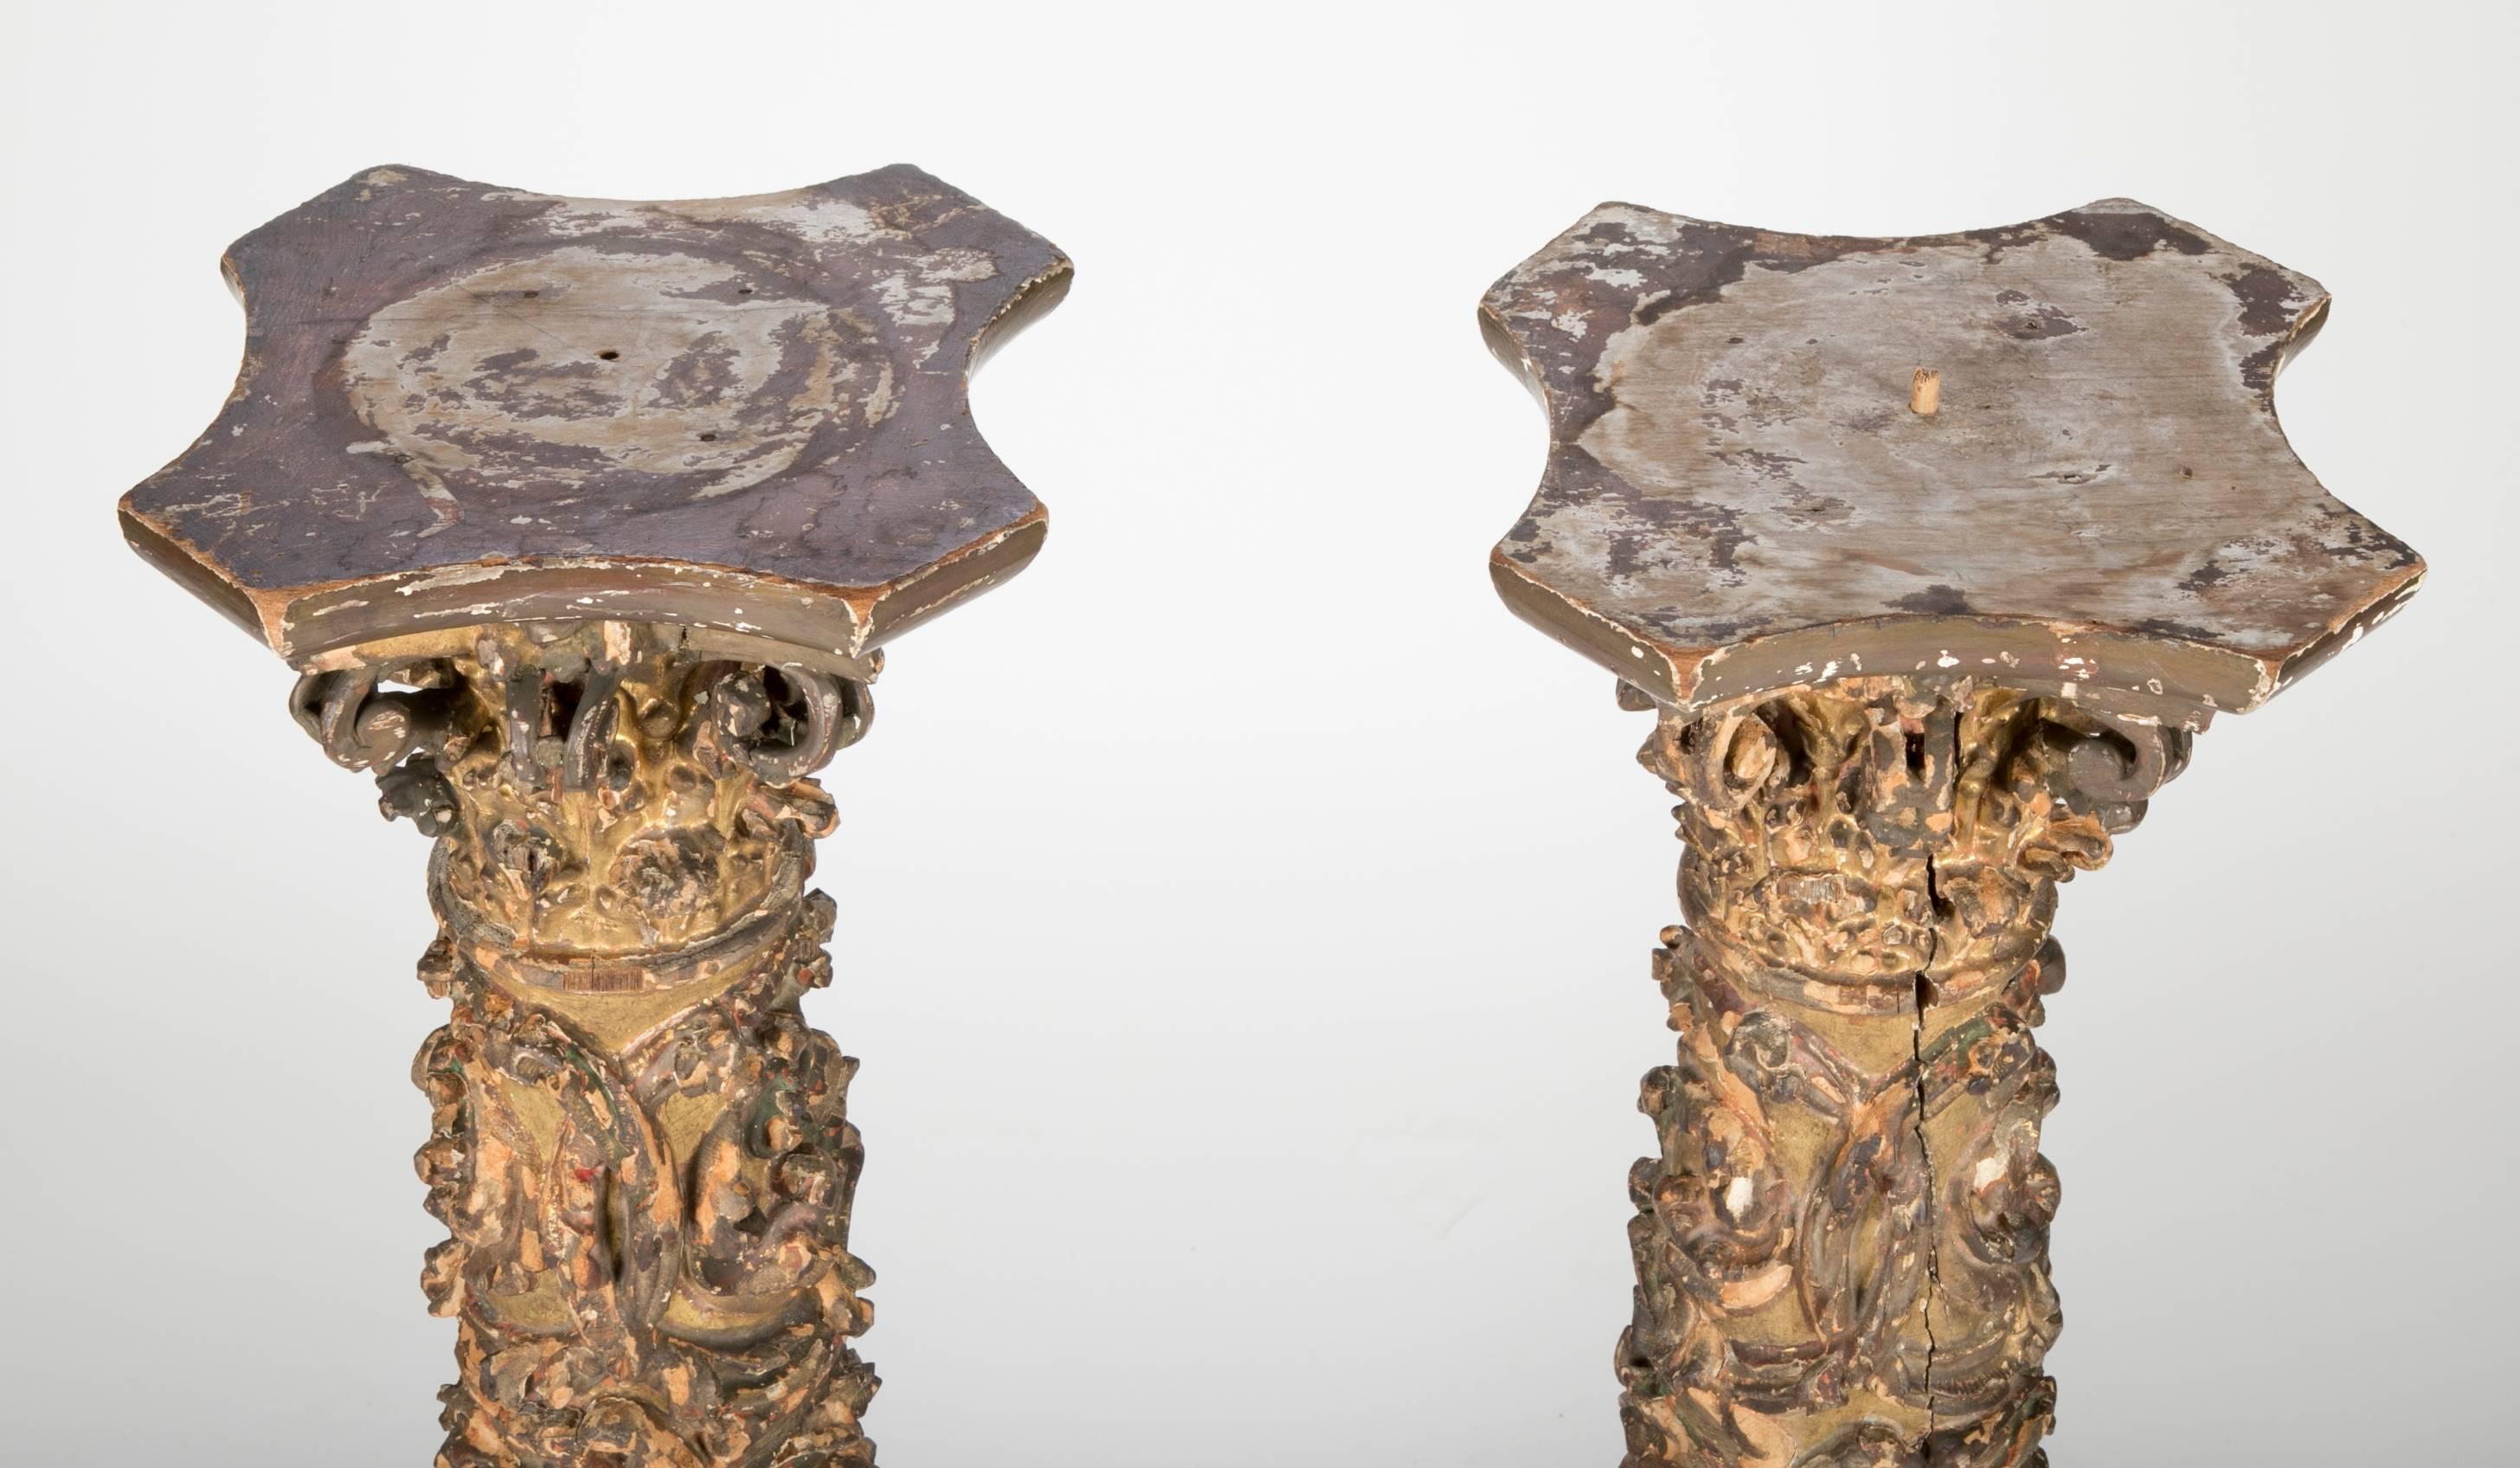 Wonderful pair of Spanish 17th century giltwood columns with exceptional carving decorated in the estofado technique of polychrome over gilding with a scratched out design. With birds, putto heads acanthus and other floral decoration. The backs are